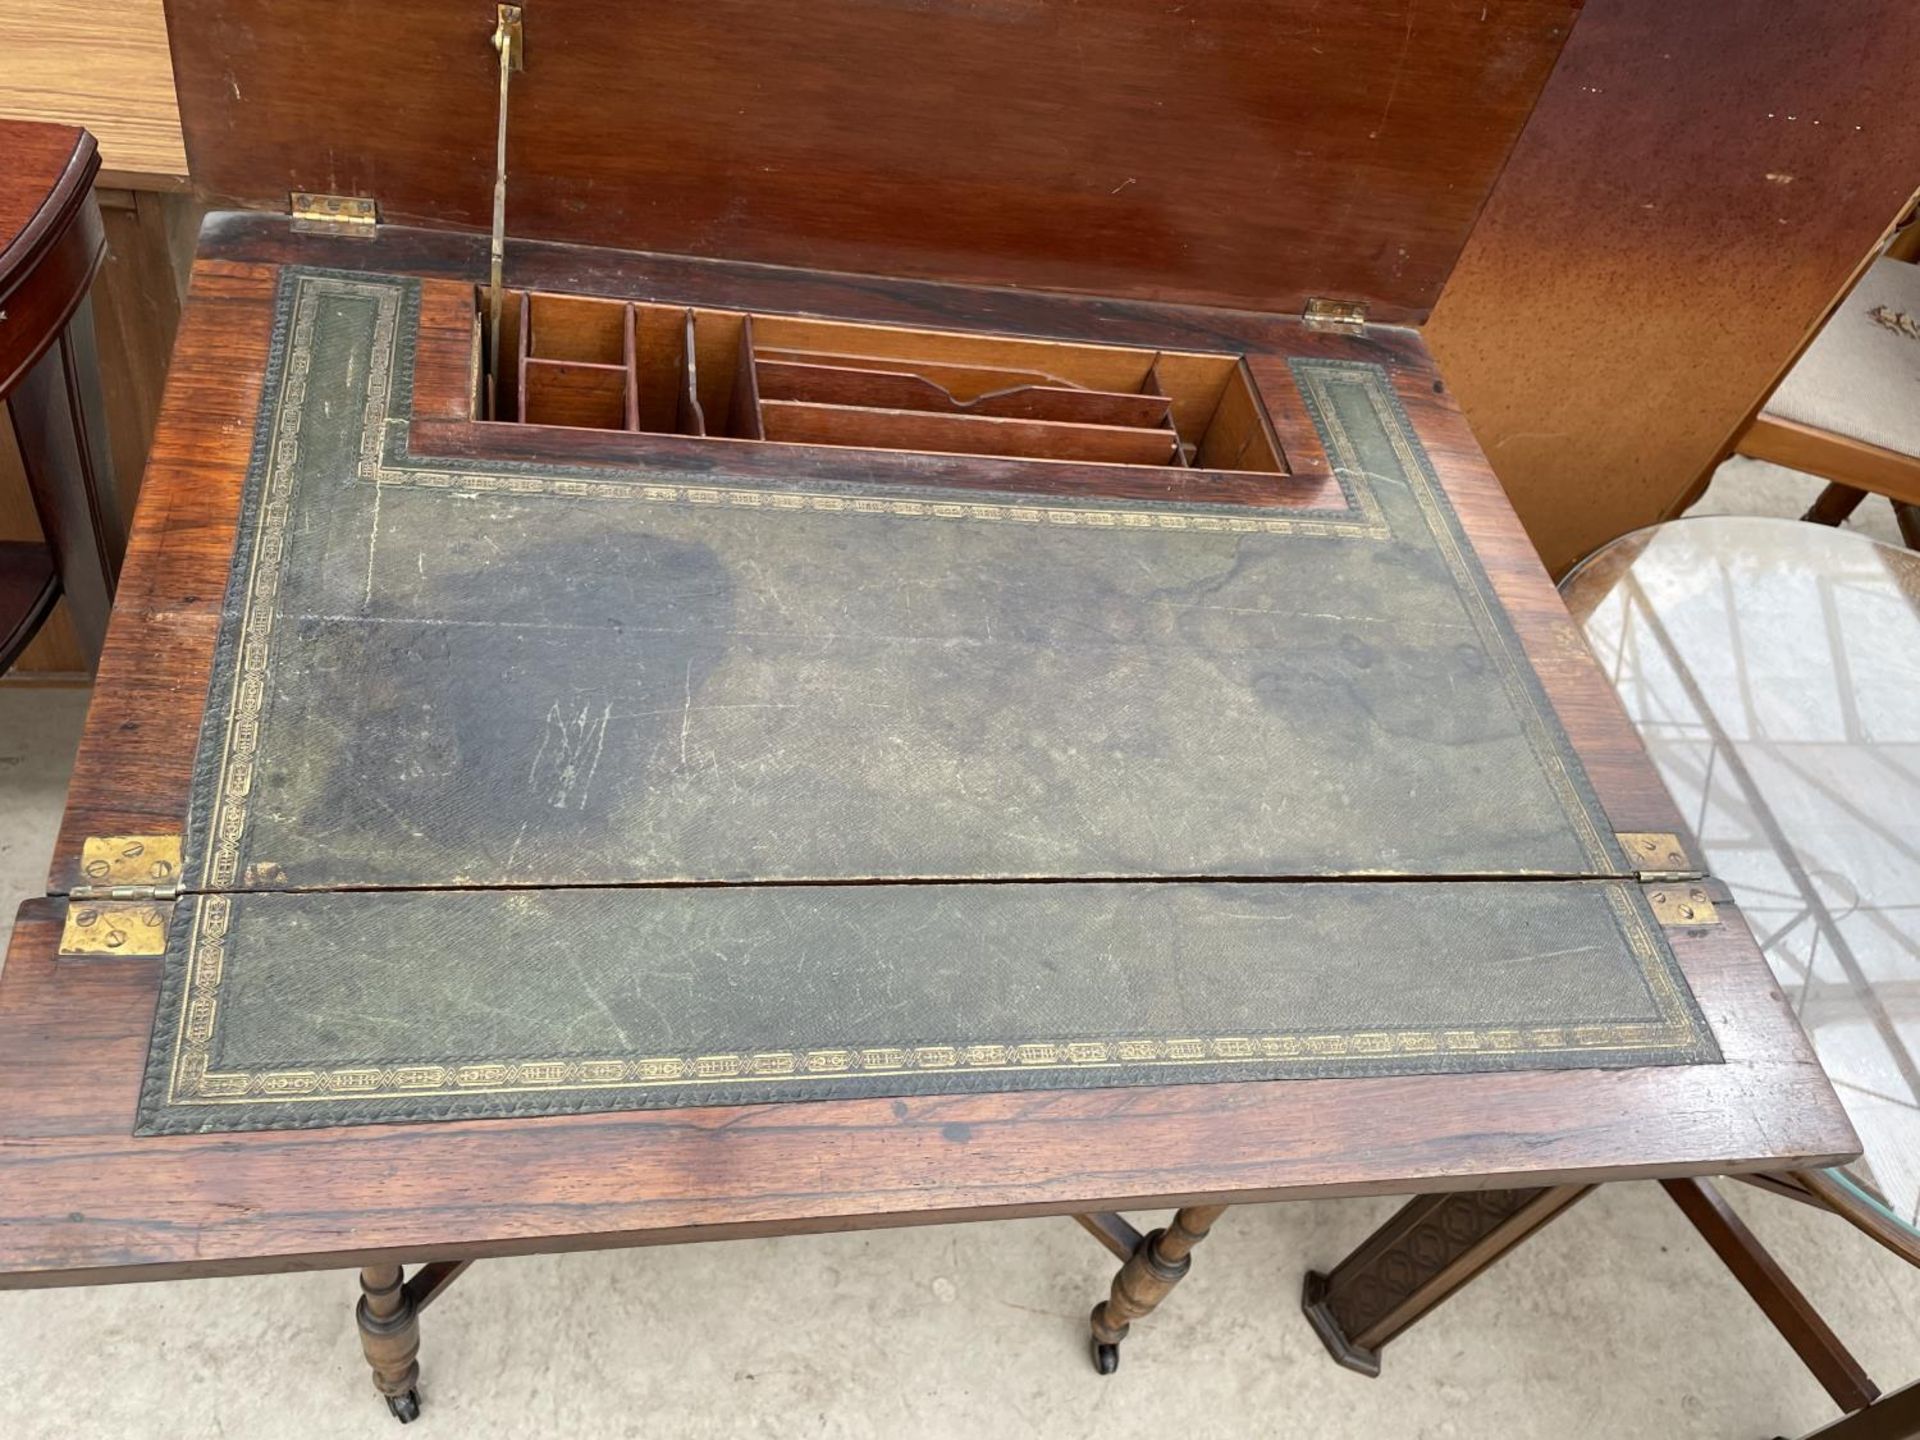 AN EDWARDIAN MAHOGANY AND INLAID FOLD OVER WRITING TABLE STAMPED J.A.S. SHOOLBRED & CO, 27" WIDE - Image 2 of 7